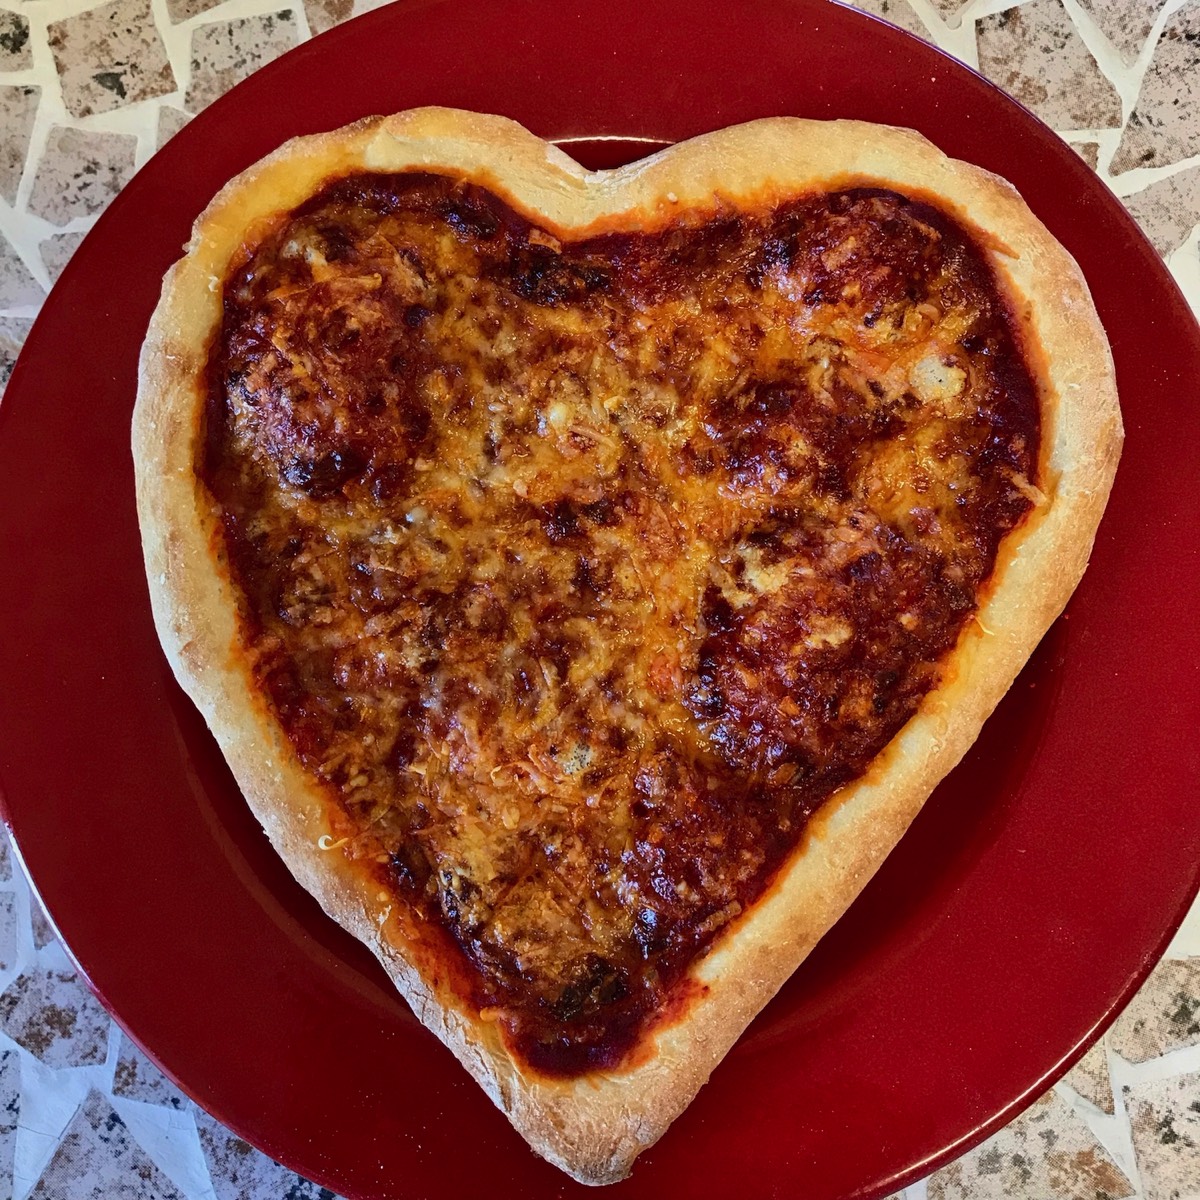 Image of heart shaped pizza